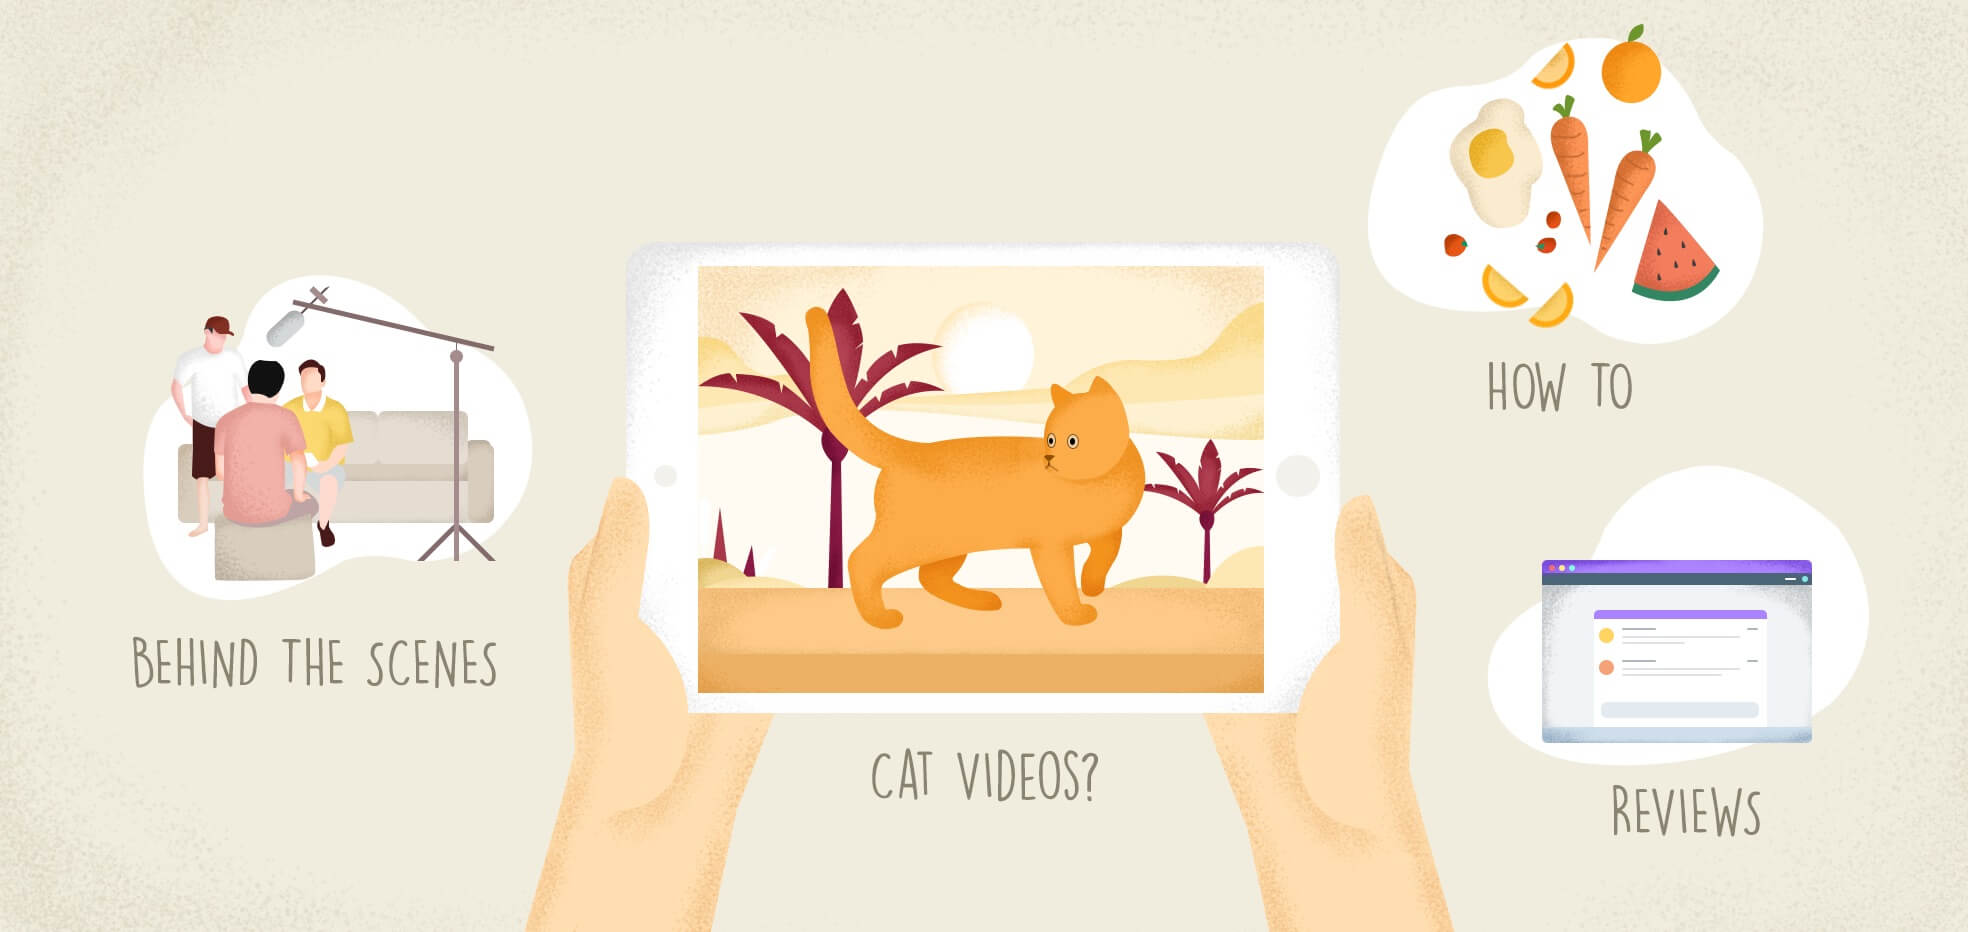 Engaging Types of Video Content That Viewers Love to Watch